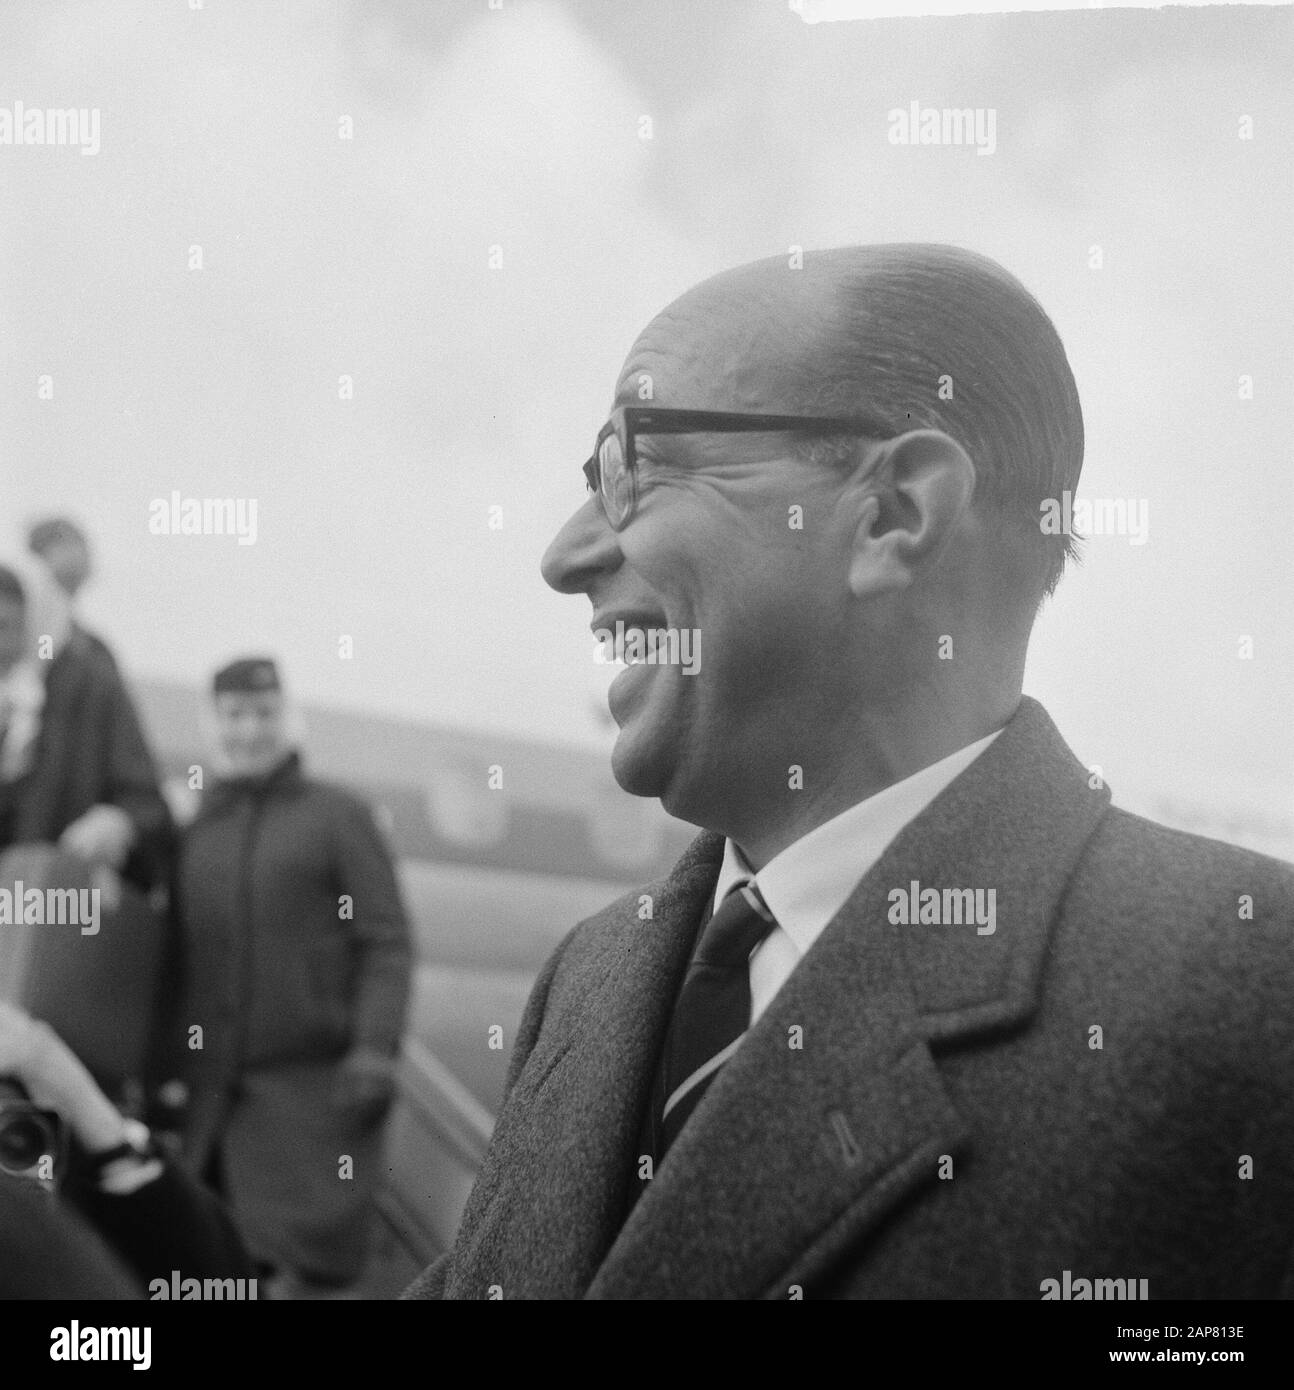 Arrival of mr. De Vries, the newly appointed governor of Suriname at Schiphol Airport. He will be sworn in in the Netherlands. Date: February 15, 1965 Location: Noord-Holland, Schiphol Keywords: arrivals, governors, overseas territories, portraits, airports Stock Photo